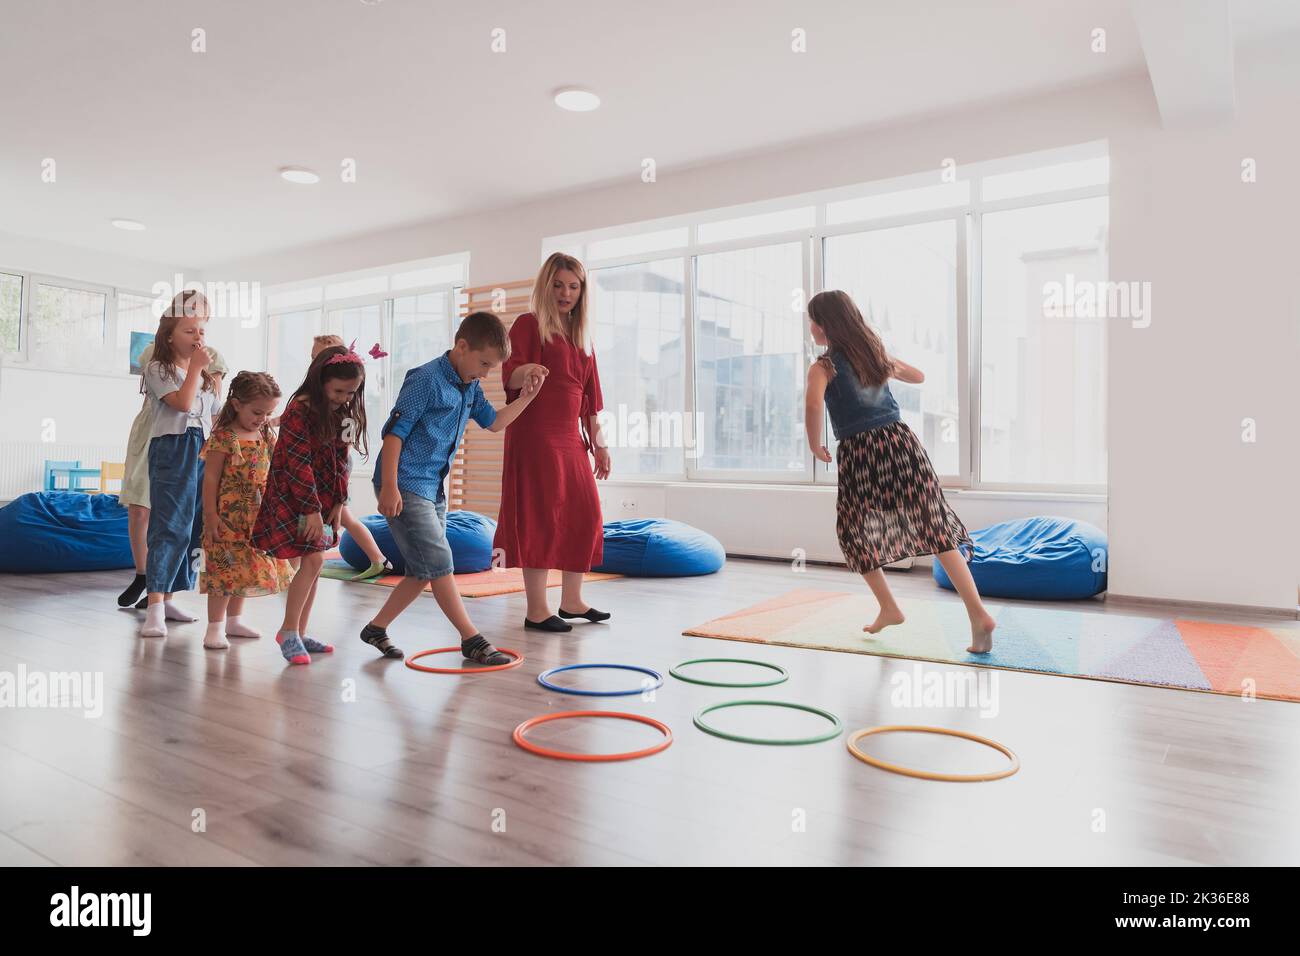 Small nursery school children with female teacher on floor indoors in classroom, doing exercise. Jumping over hula hoop circles track on the floor. Stock Photo